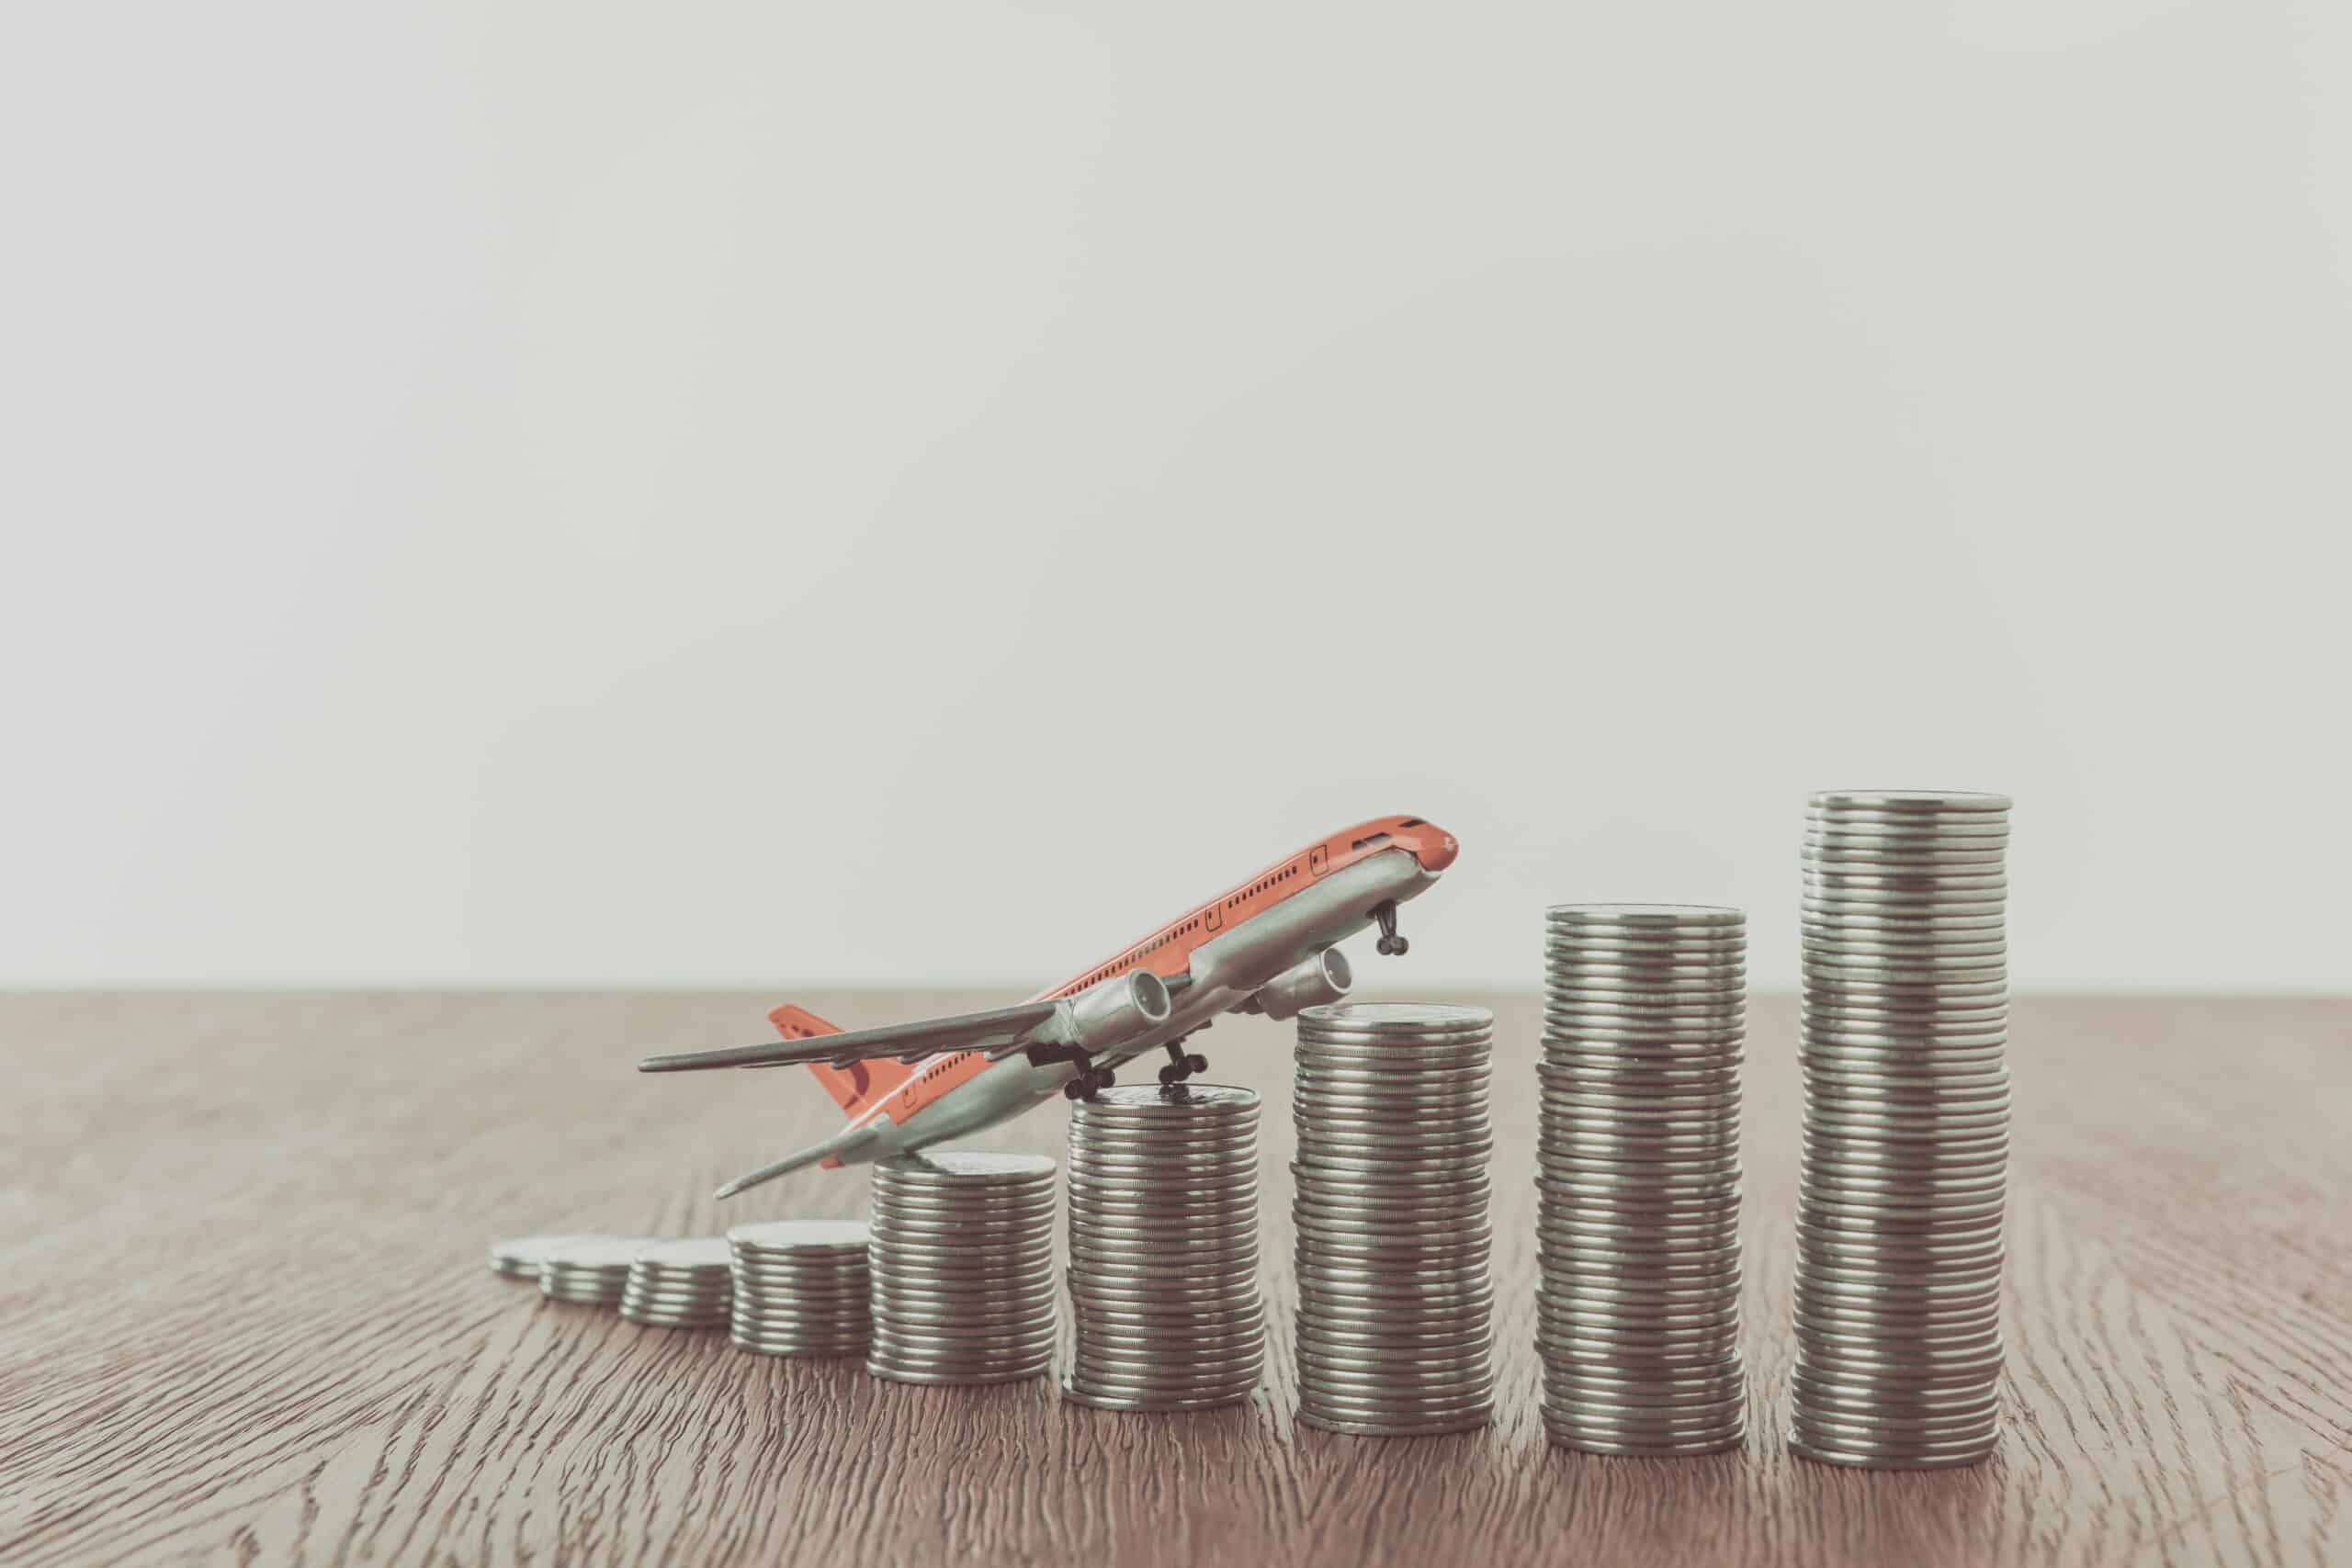 toy plane on stacks of coins on wooden table